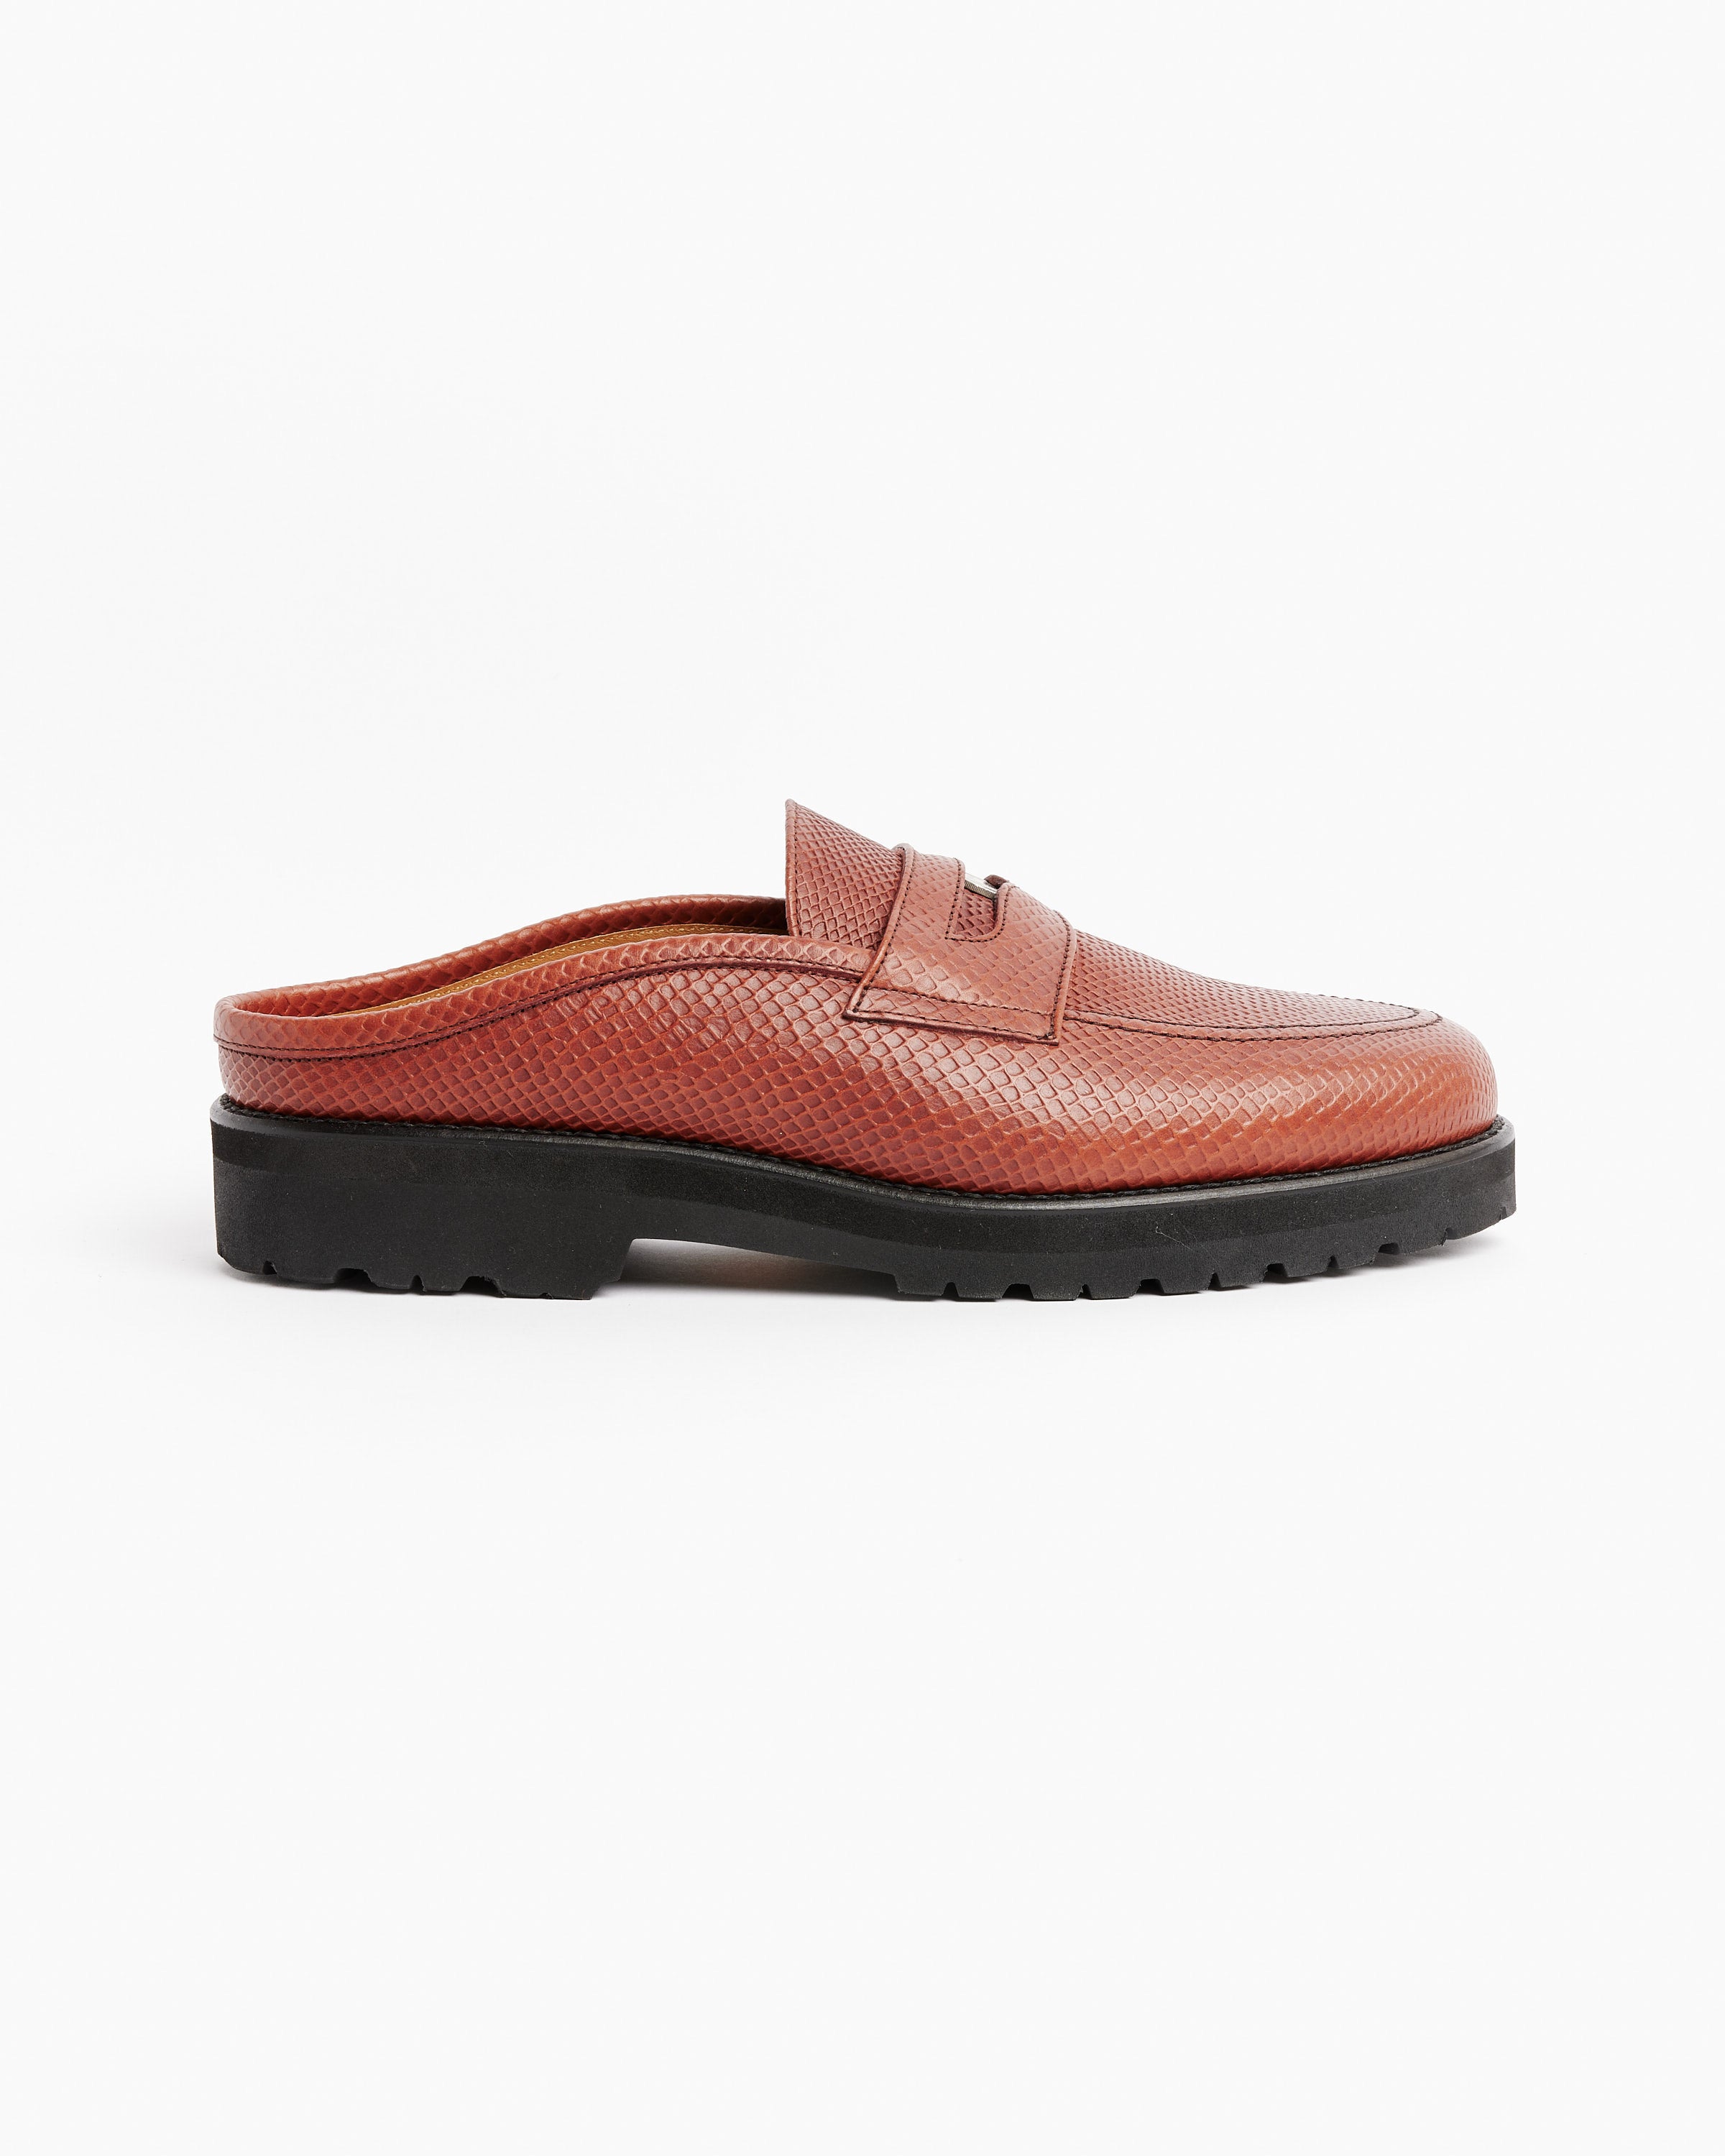 Coin Loafer Mule in Brown